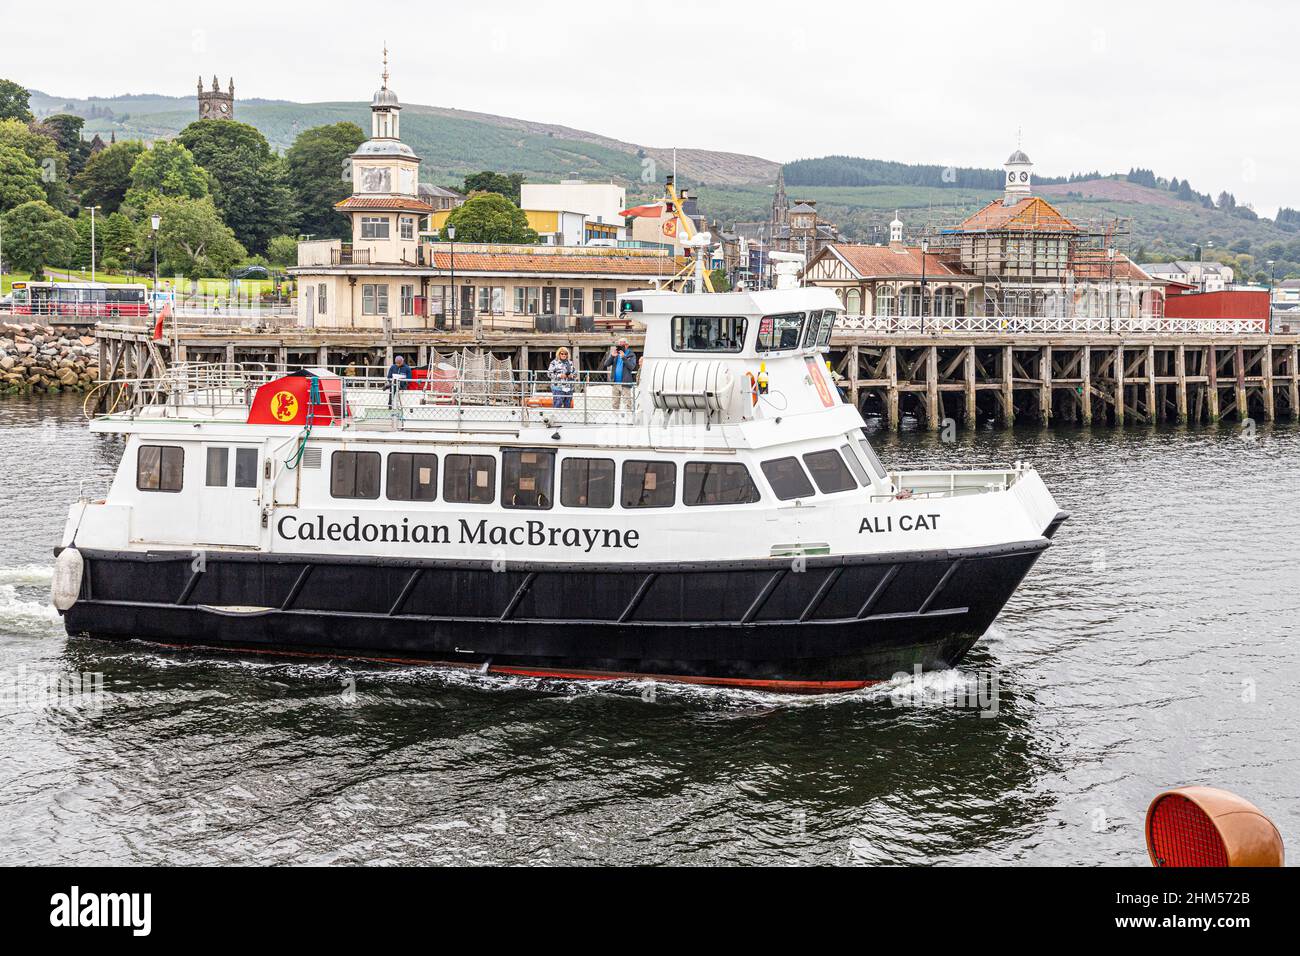 The Caledonian MacBrayne ferry Ali Cat passing the Victorian Pier at the start of its journey to Gourock from Dunoon, Argyll & Bute, Scotland UK Stock Photo